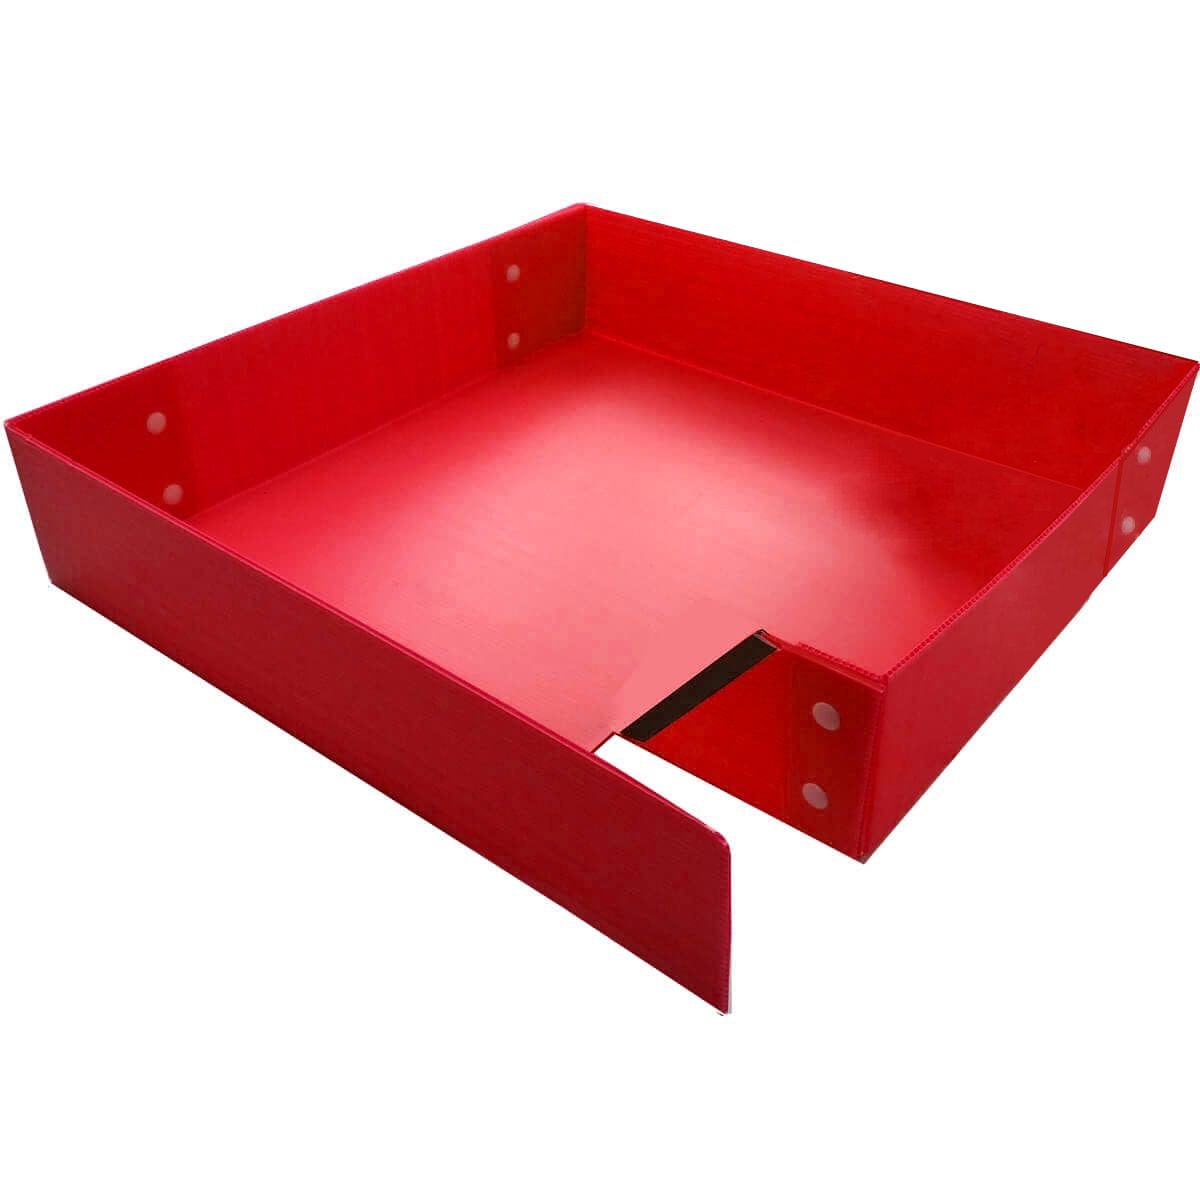 Red coroplast base for a wide loft inset